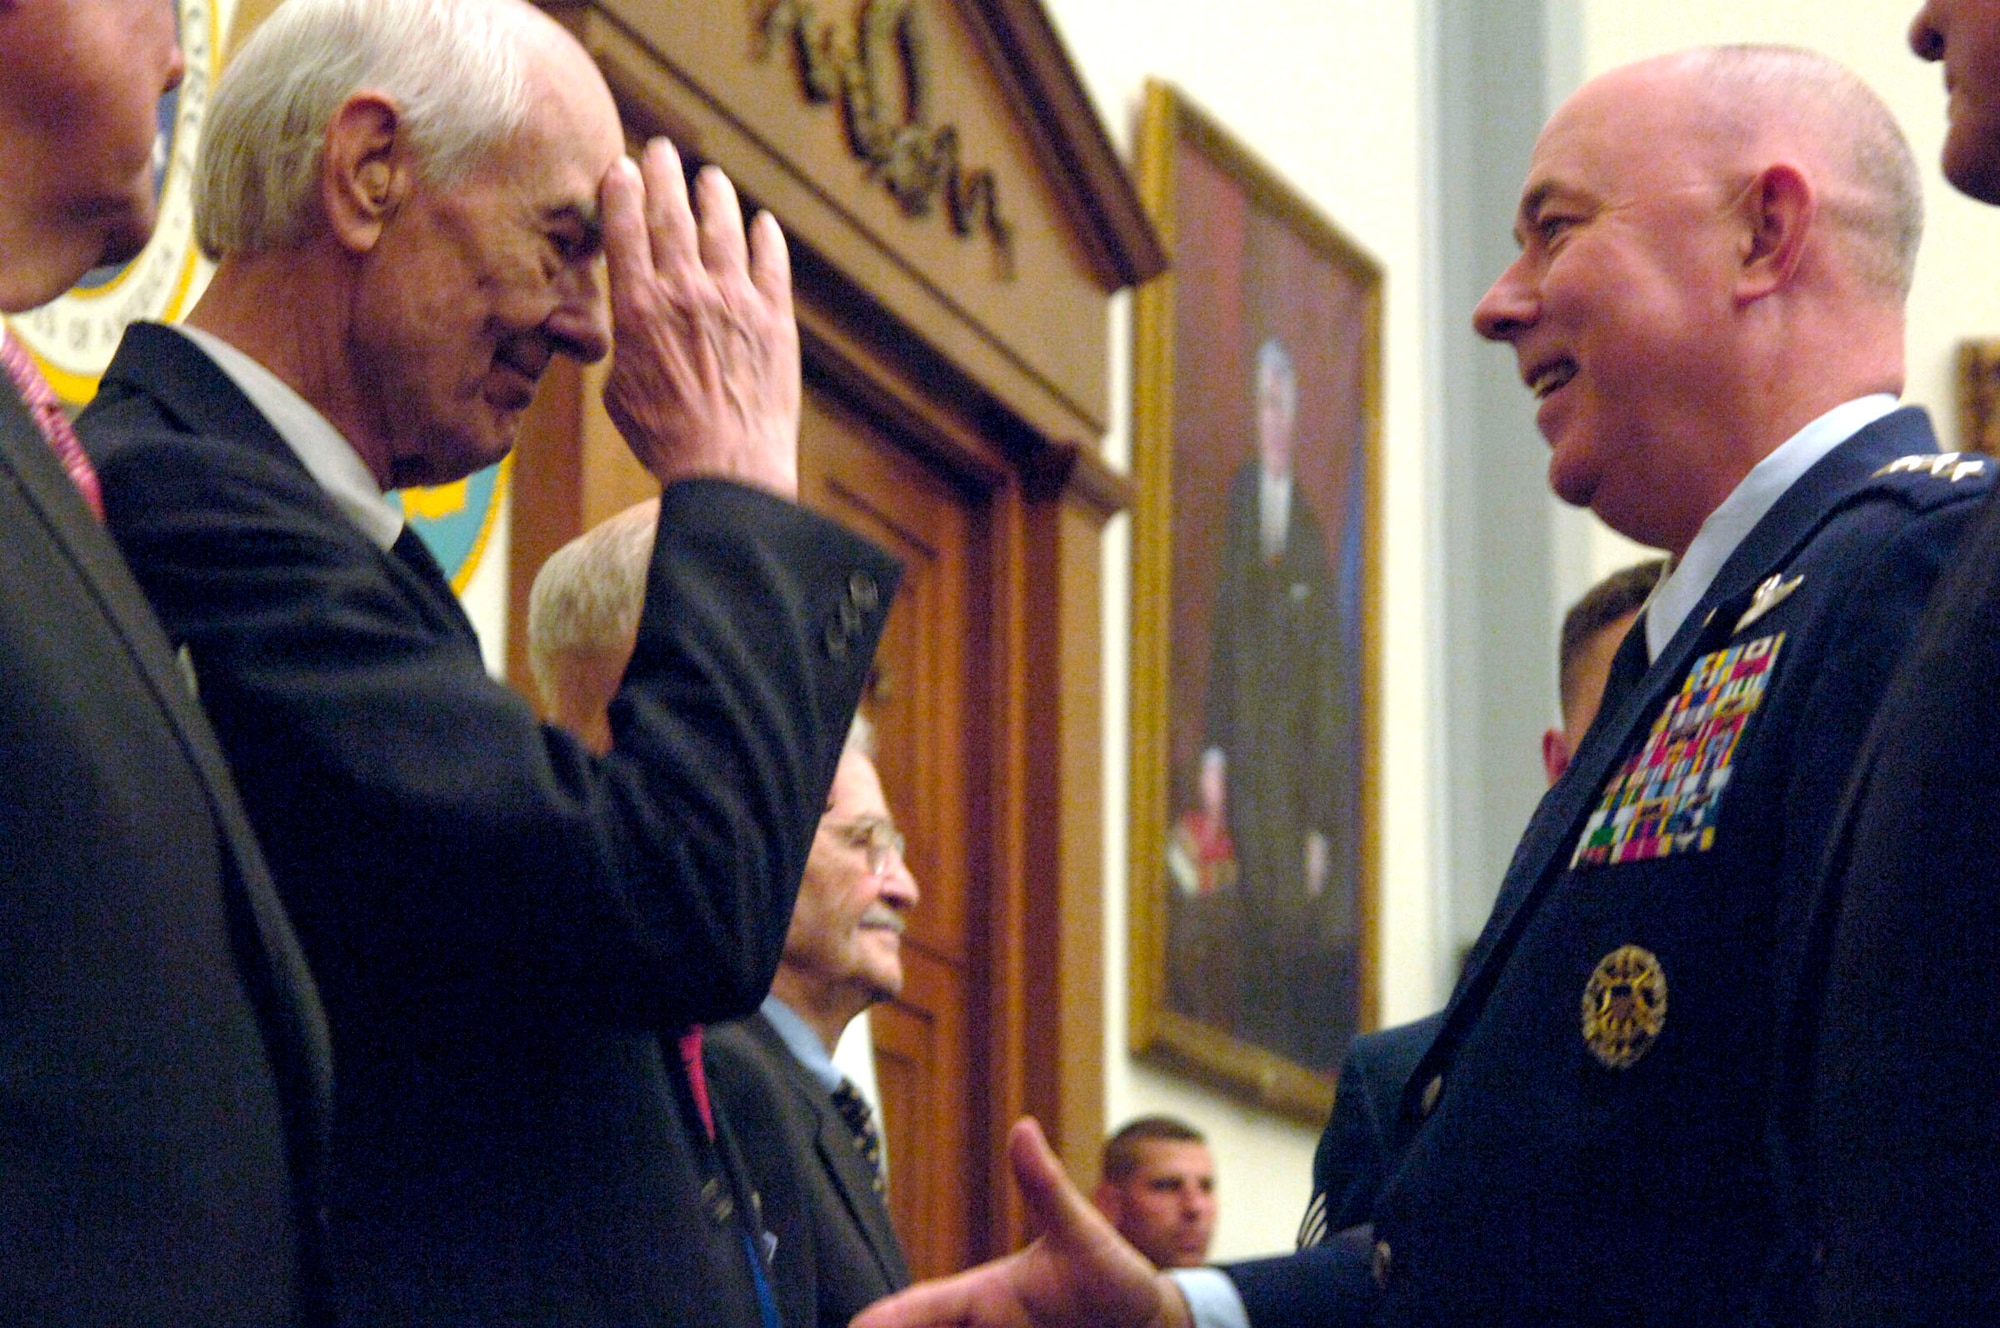 Former Staff Sgt. Robert D. Speed salutes Air Force Chief of Staff Gen. T. Michael Moseley after receiving the Distinguished Flying Cross for his role in the Ploesti, Italy, mission 63 years ago. Mr. Speed was a member of a B-24 Liberator Bomber crew who encountered heavy anti-aircraft fire July 15, 1944, and as a result lost one engine. The crew still managed to complete their mission of bombing oil refineries in Romania, but was shot down the next day while participating in a raid over Austria; they were taken prisoner of war. (U.S. Air Force photo/Tech. Sgt. Cohen A. Young)